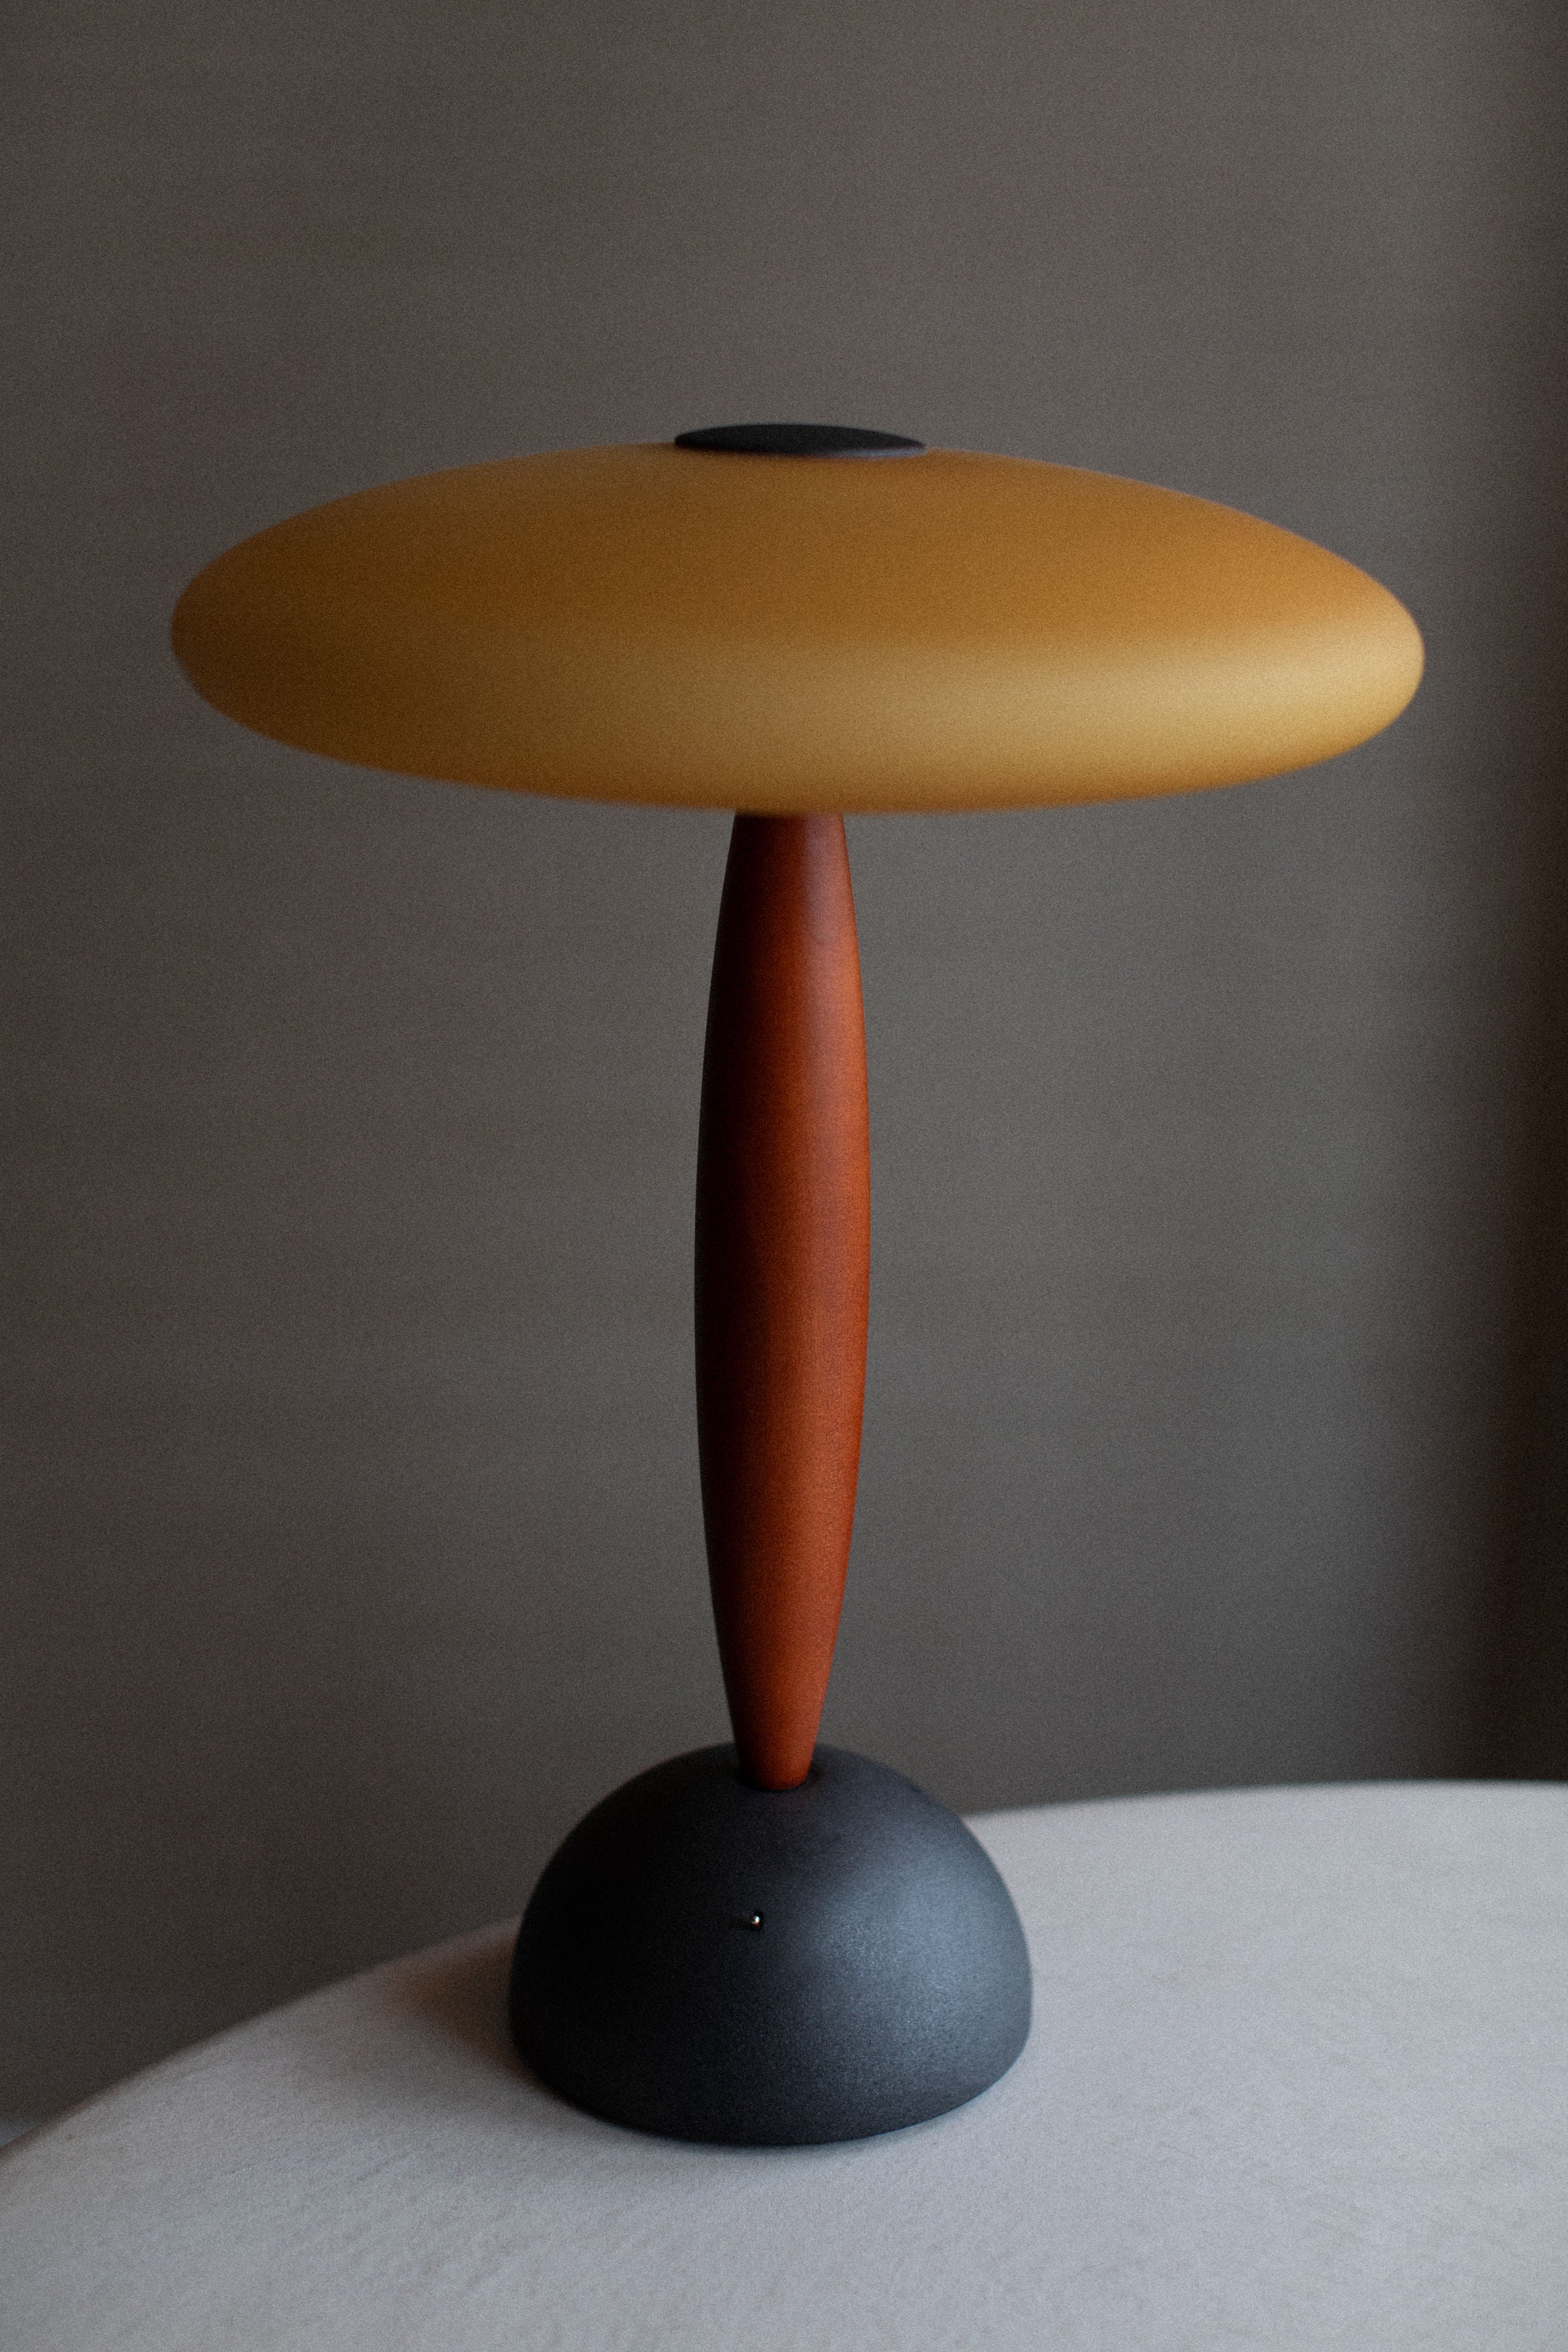 A contemporary handcrafted Vintage Murano Lamp by Out For Lunch with a unique design featuring a mustard yellow lampshade, a slender terracotta-colored stem, and a round matte black base, set against a neutral gray background.